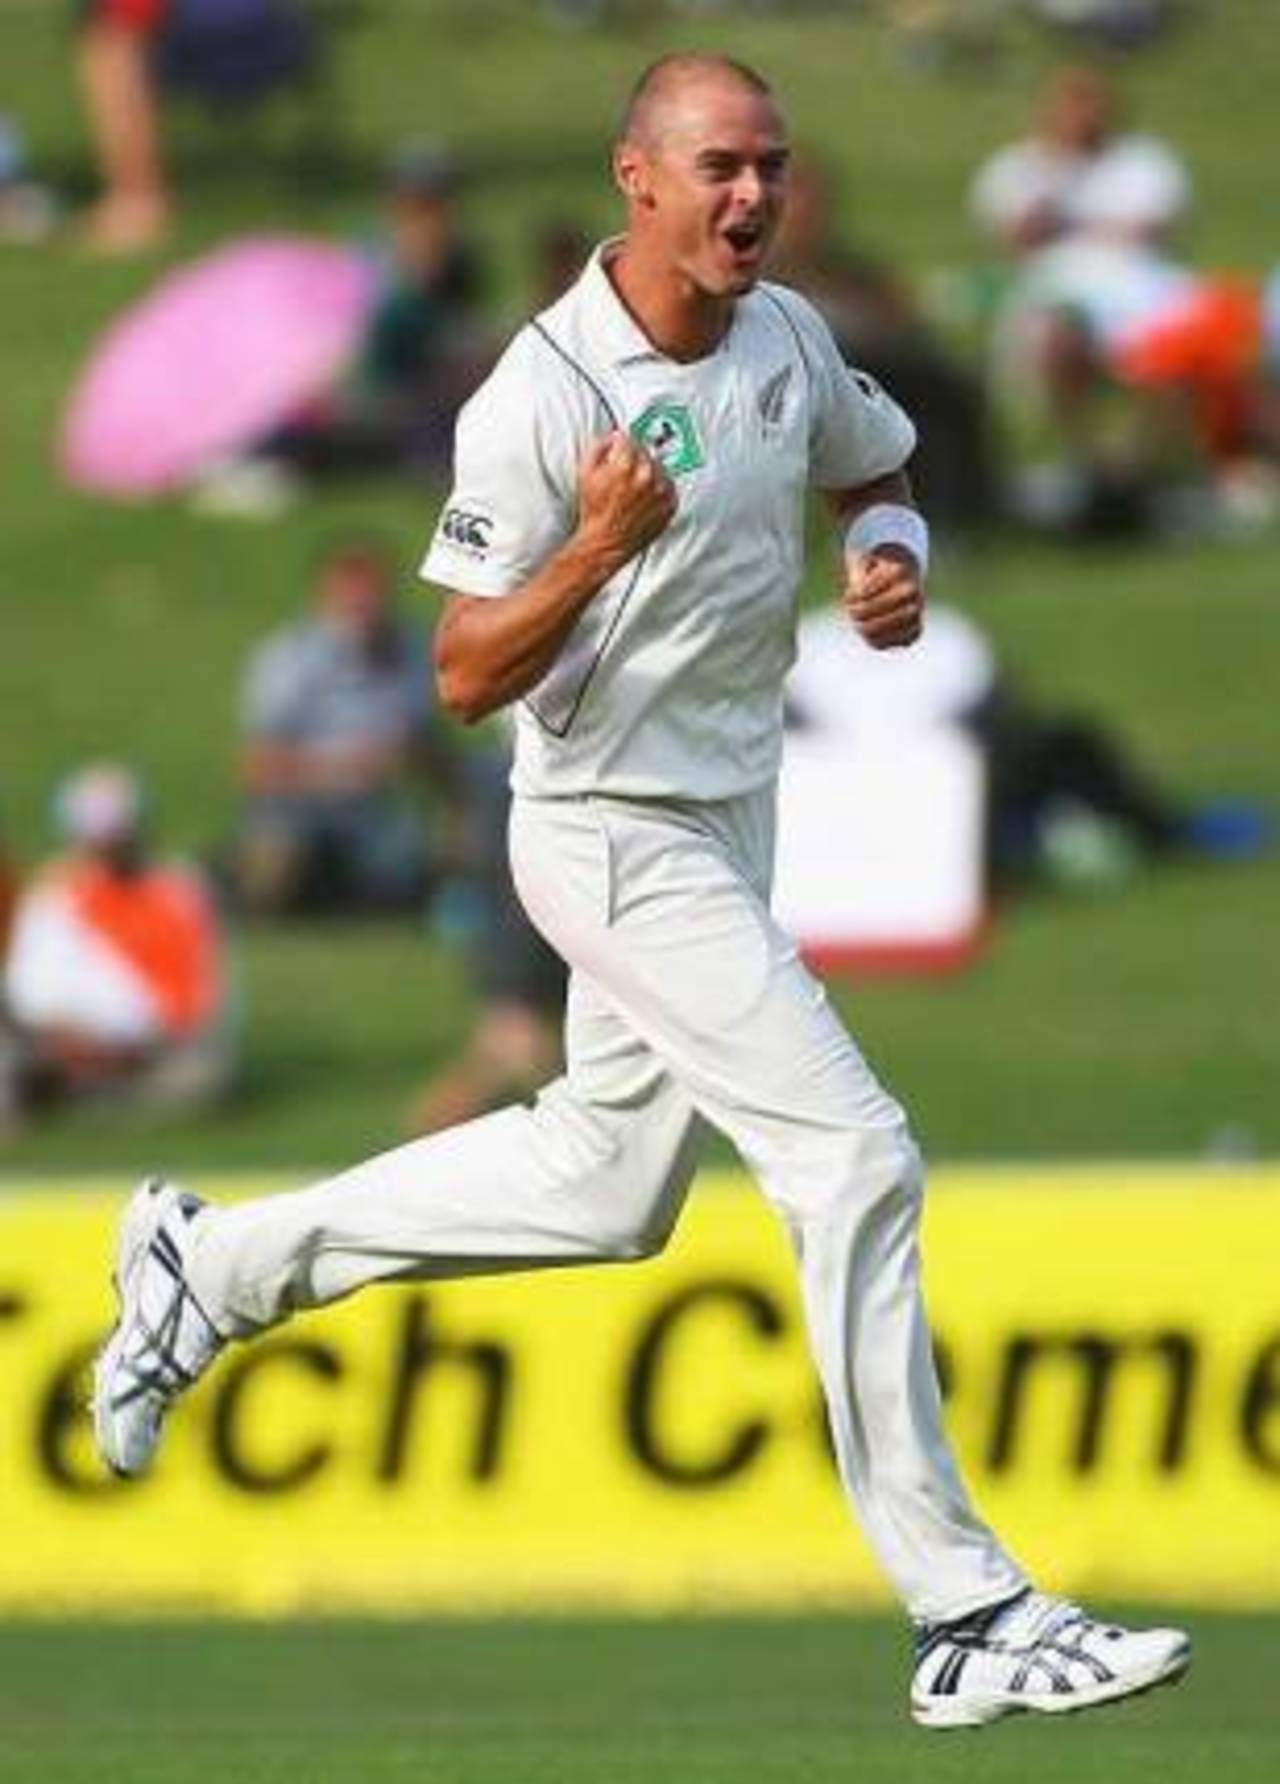 Chris Martin celebrates his 150th Test wicket, New Zealand v India, 2nd Test, Napier, 3rd day, March 28, 2009